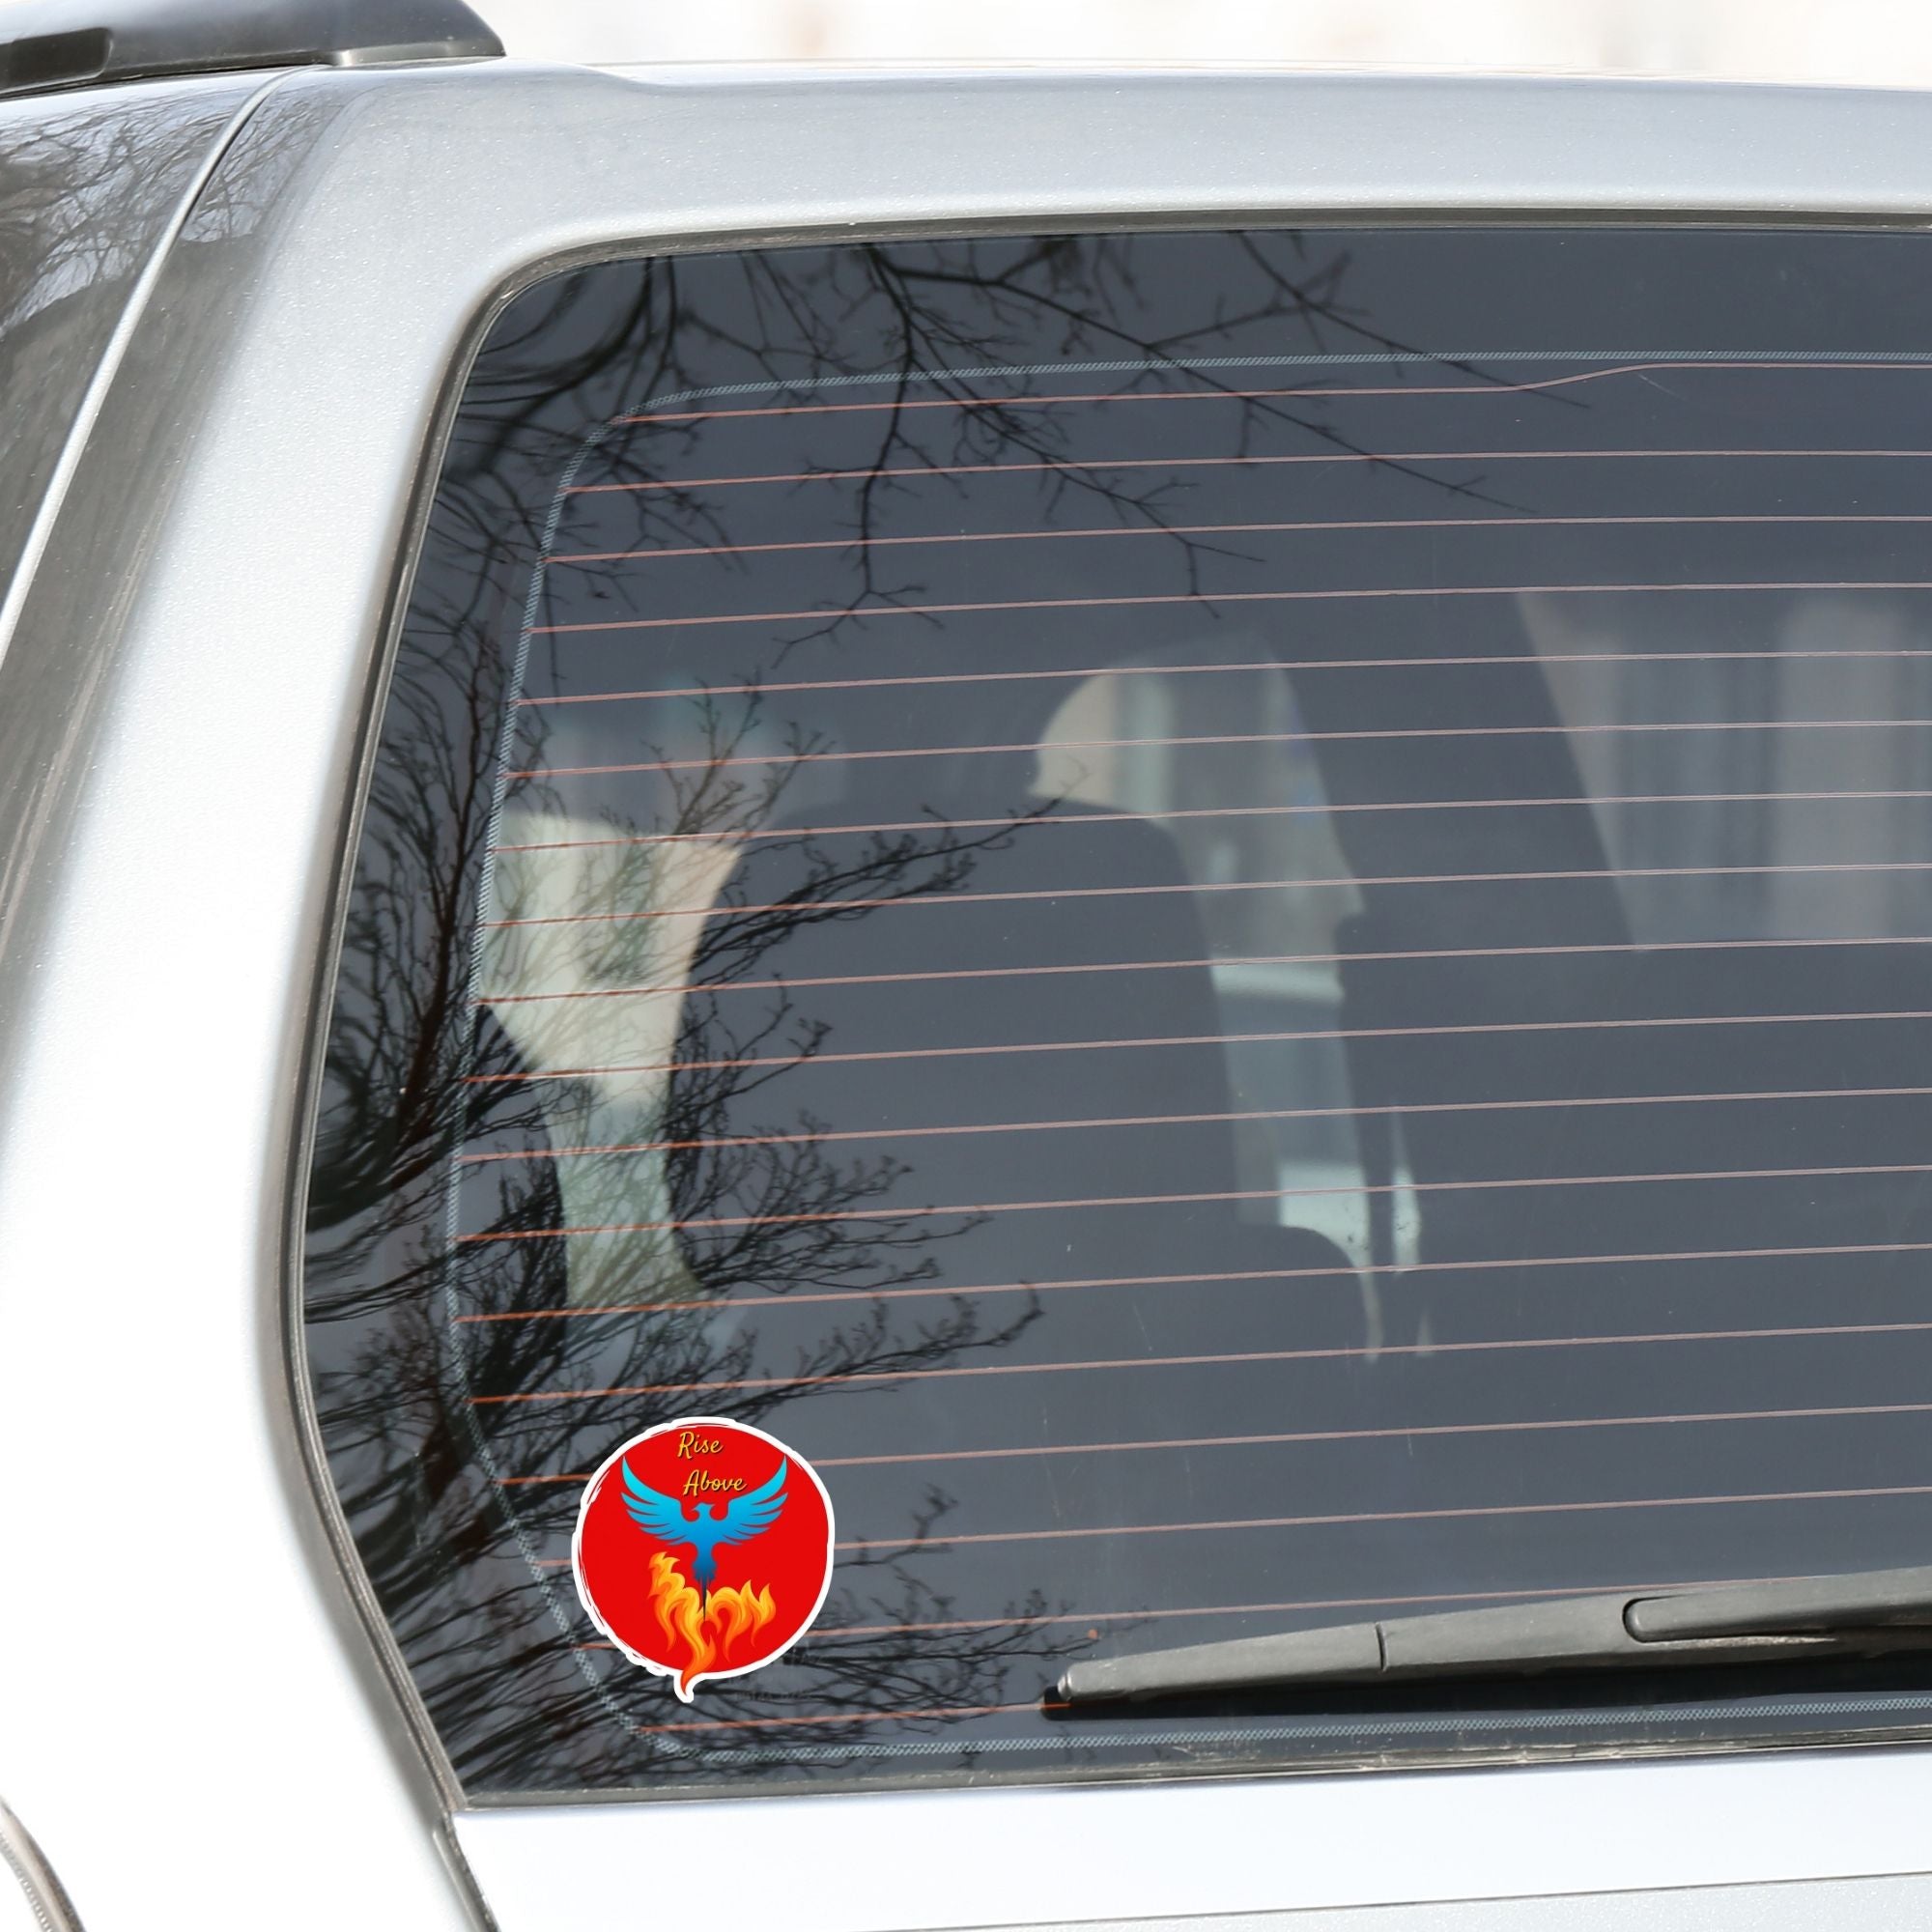 Phoenix rising - this individual die-cut sticker features a blue phoenix rising out of flames with the words "Rise Above" at the top, all on a red background. This image shows the Rise Above sticker on the back window of a car.